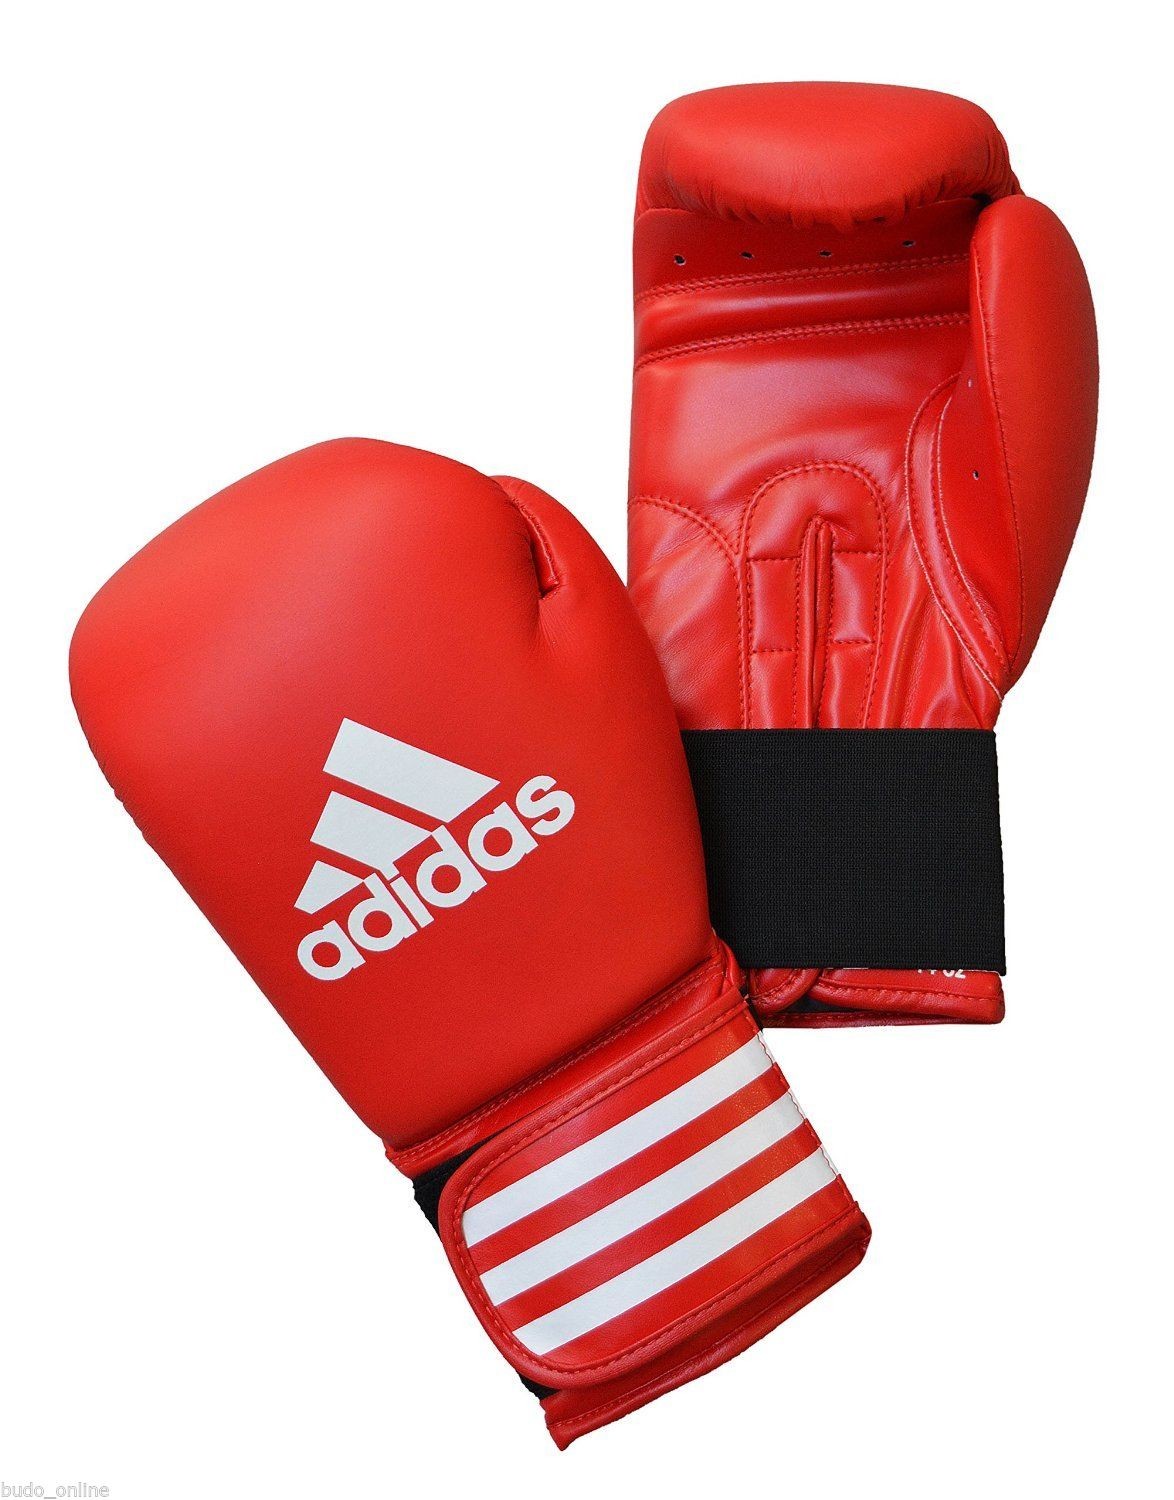 Adidas Performer Boxing Gloves-Red 